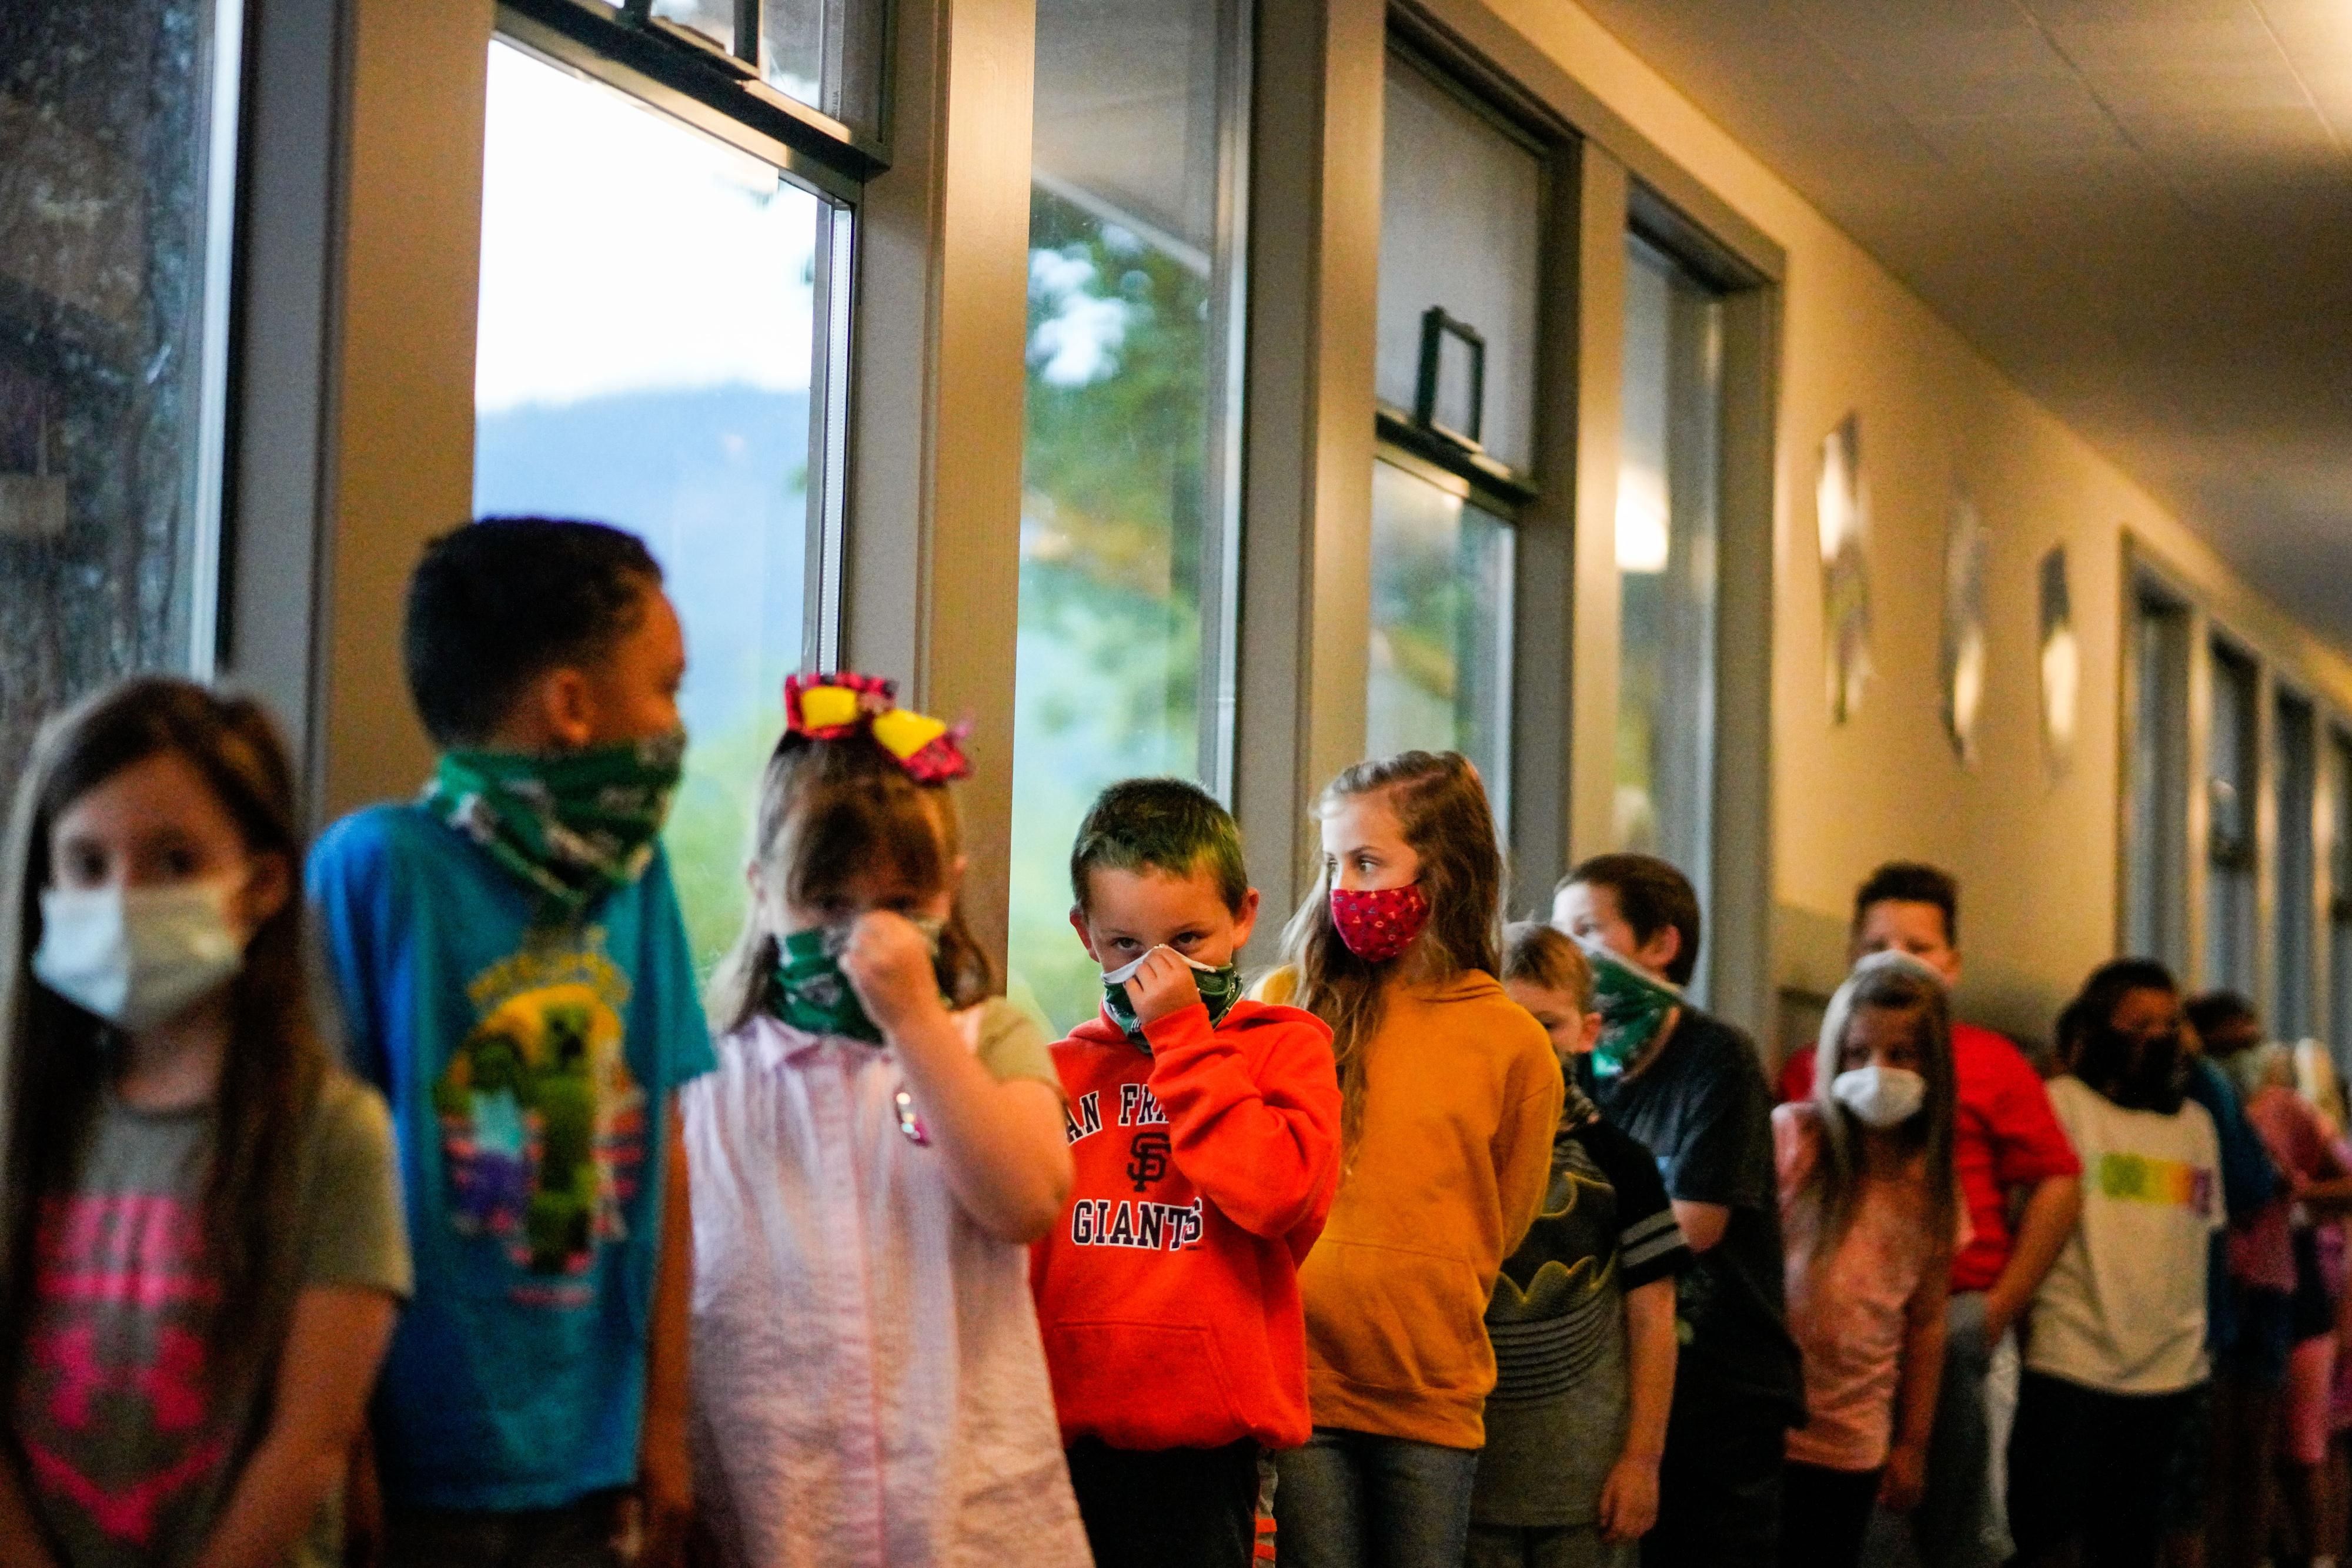 Students and children wearing masks during the Covid-19 pandemic.